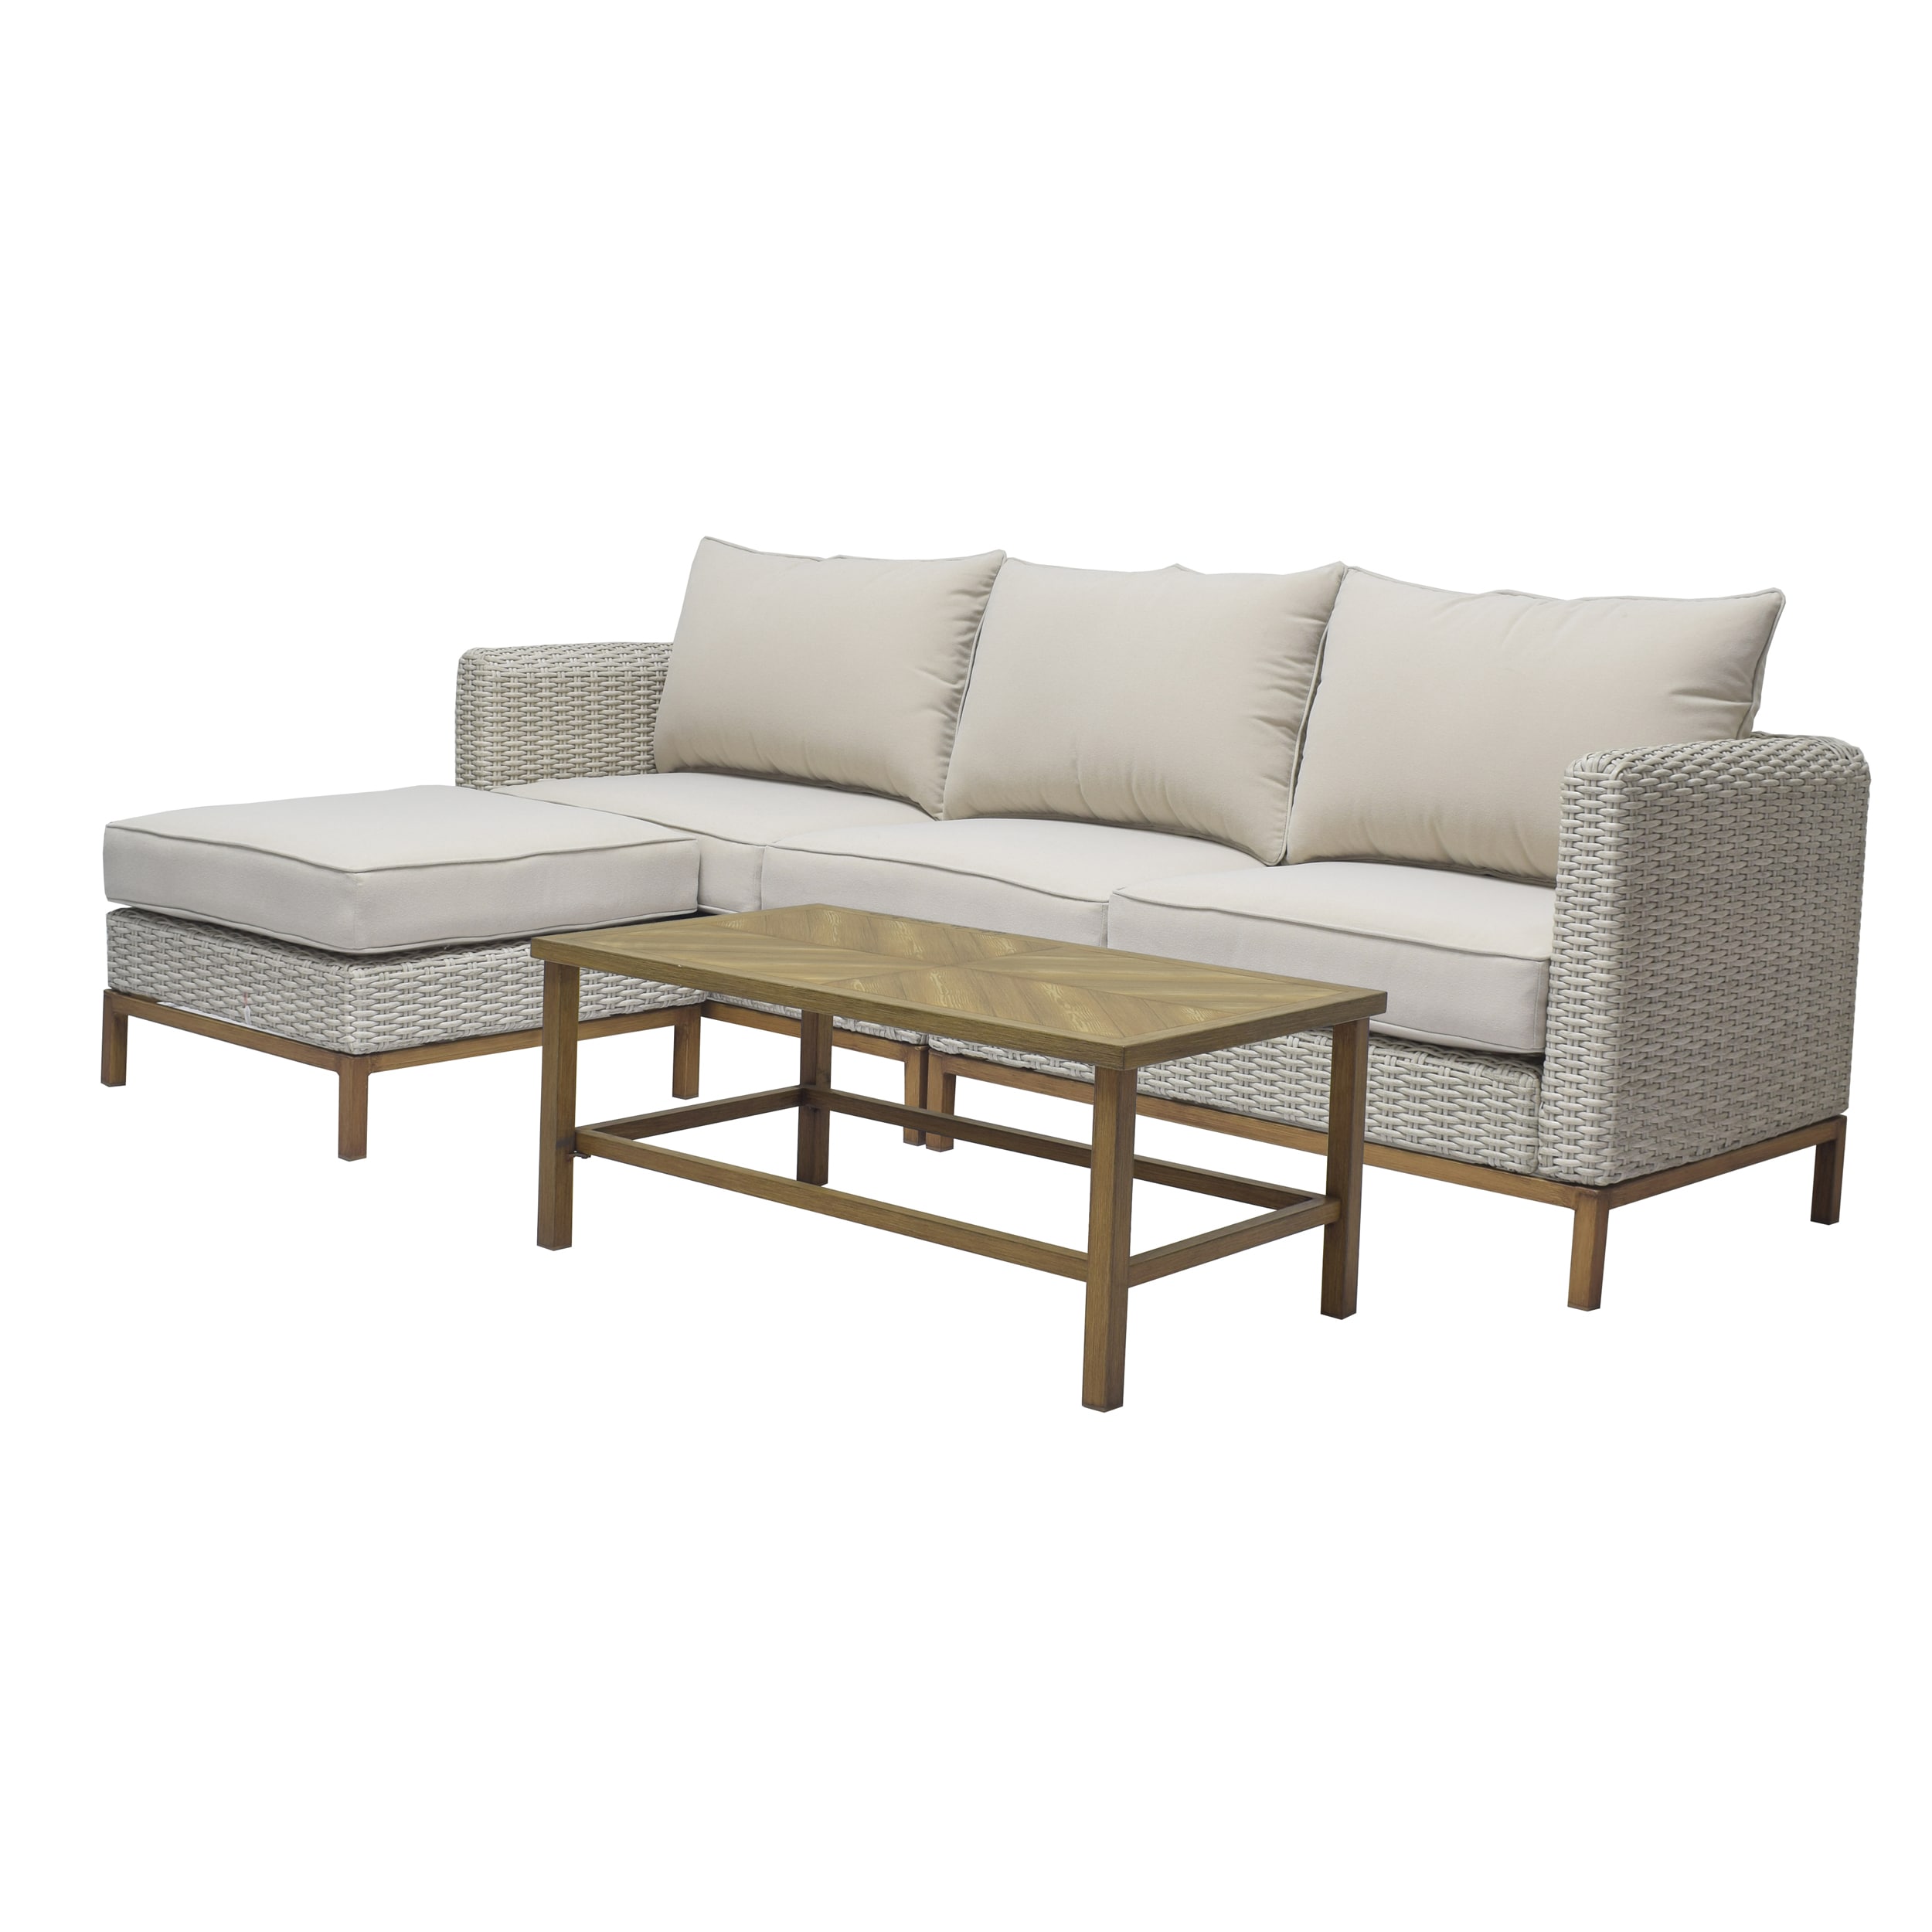 Origin 21 Veda Patio with Wicker Cushions Set 4-Piece Springs Patio department Conversation the Off-white in Conversation Sets at